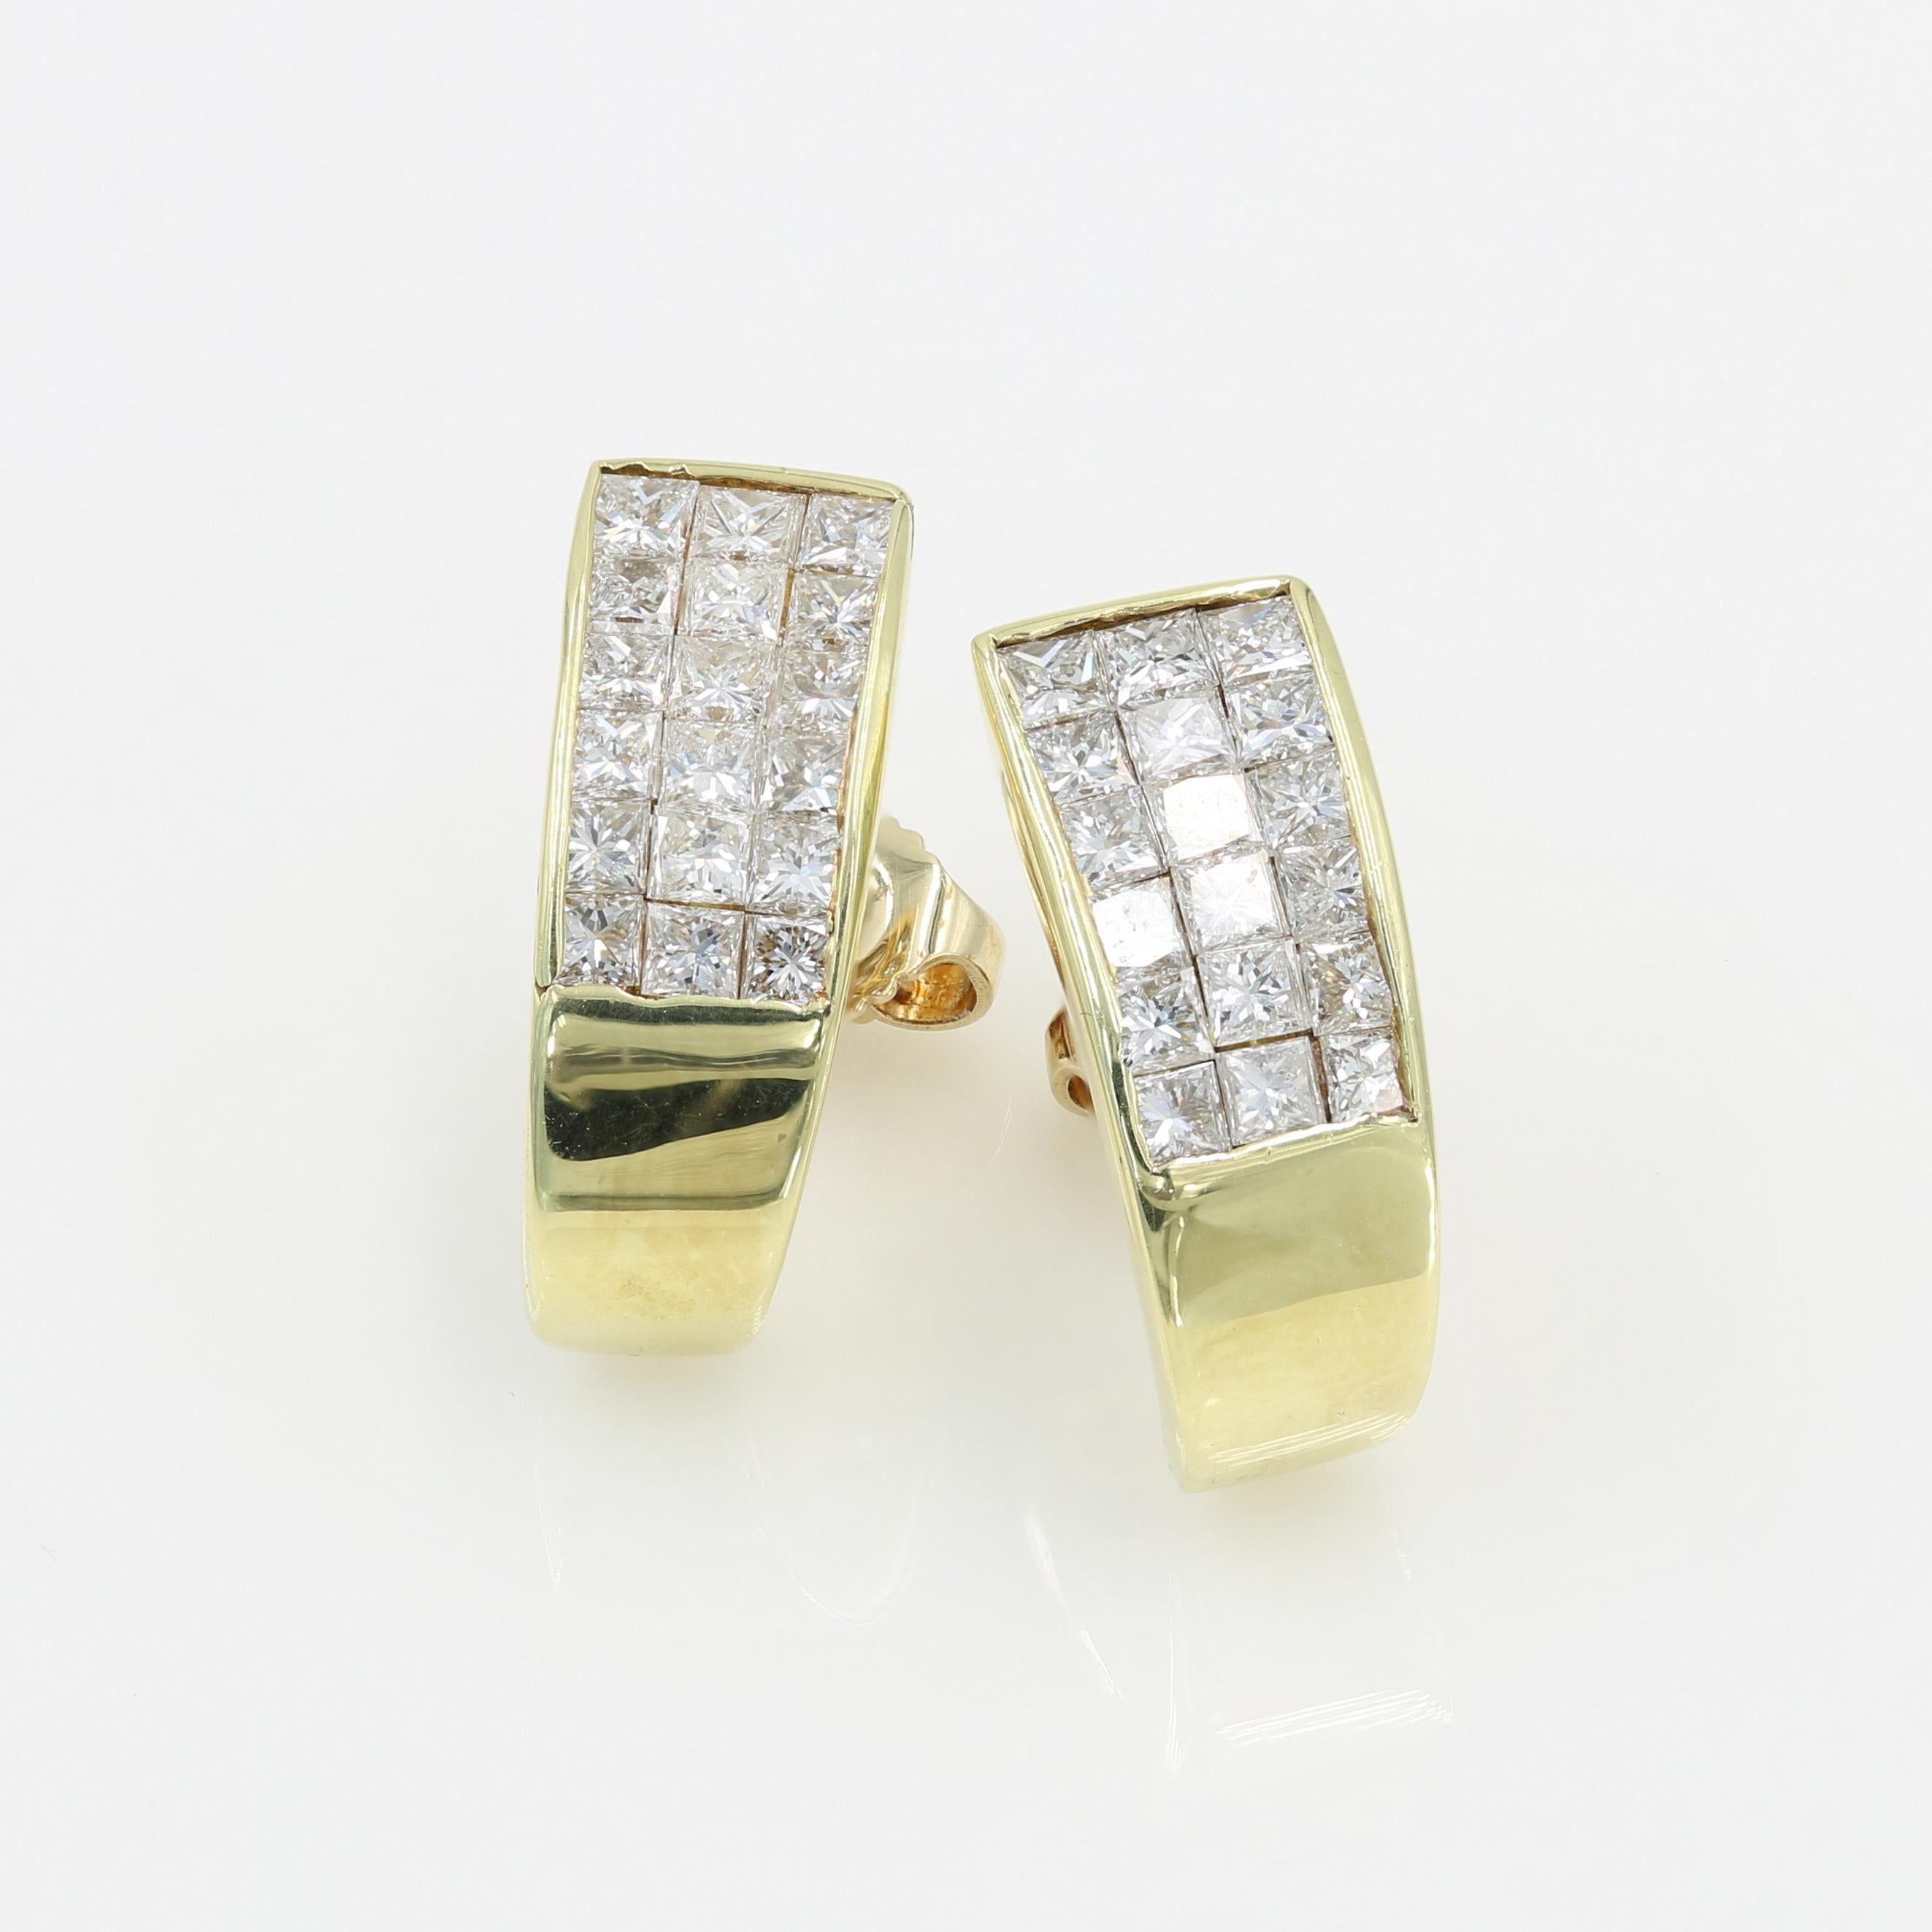 Invisible set princess cut diamond earrings in 18kt yellow gold (backs are 14kt) - 36 Princess Cut Diamonds =  approx. 1.75tw  G/H color VS clarity - Post & Clutch back - Pre-owned but restored to like new condition